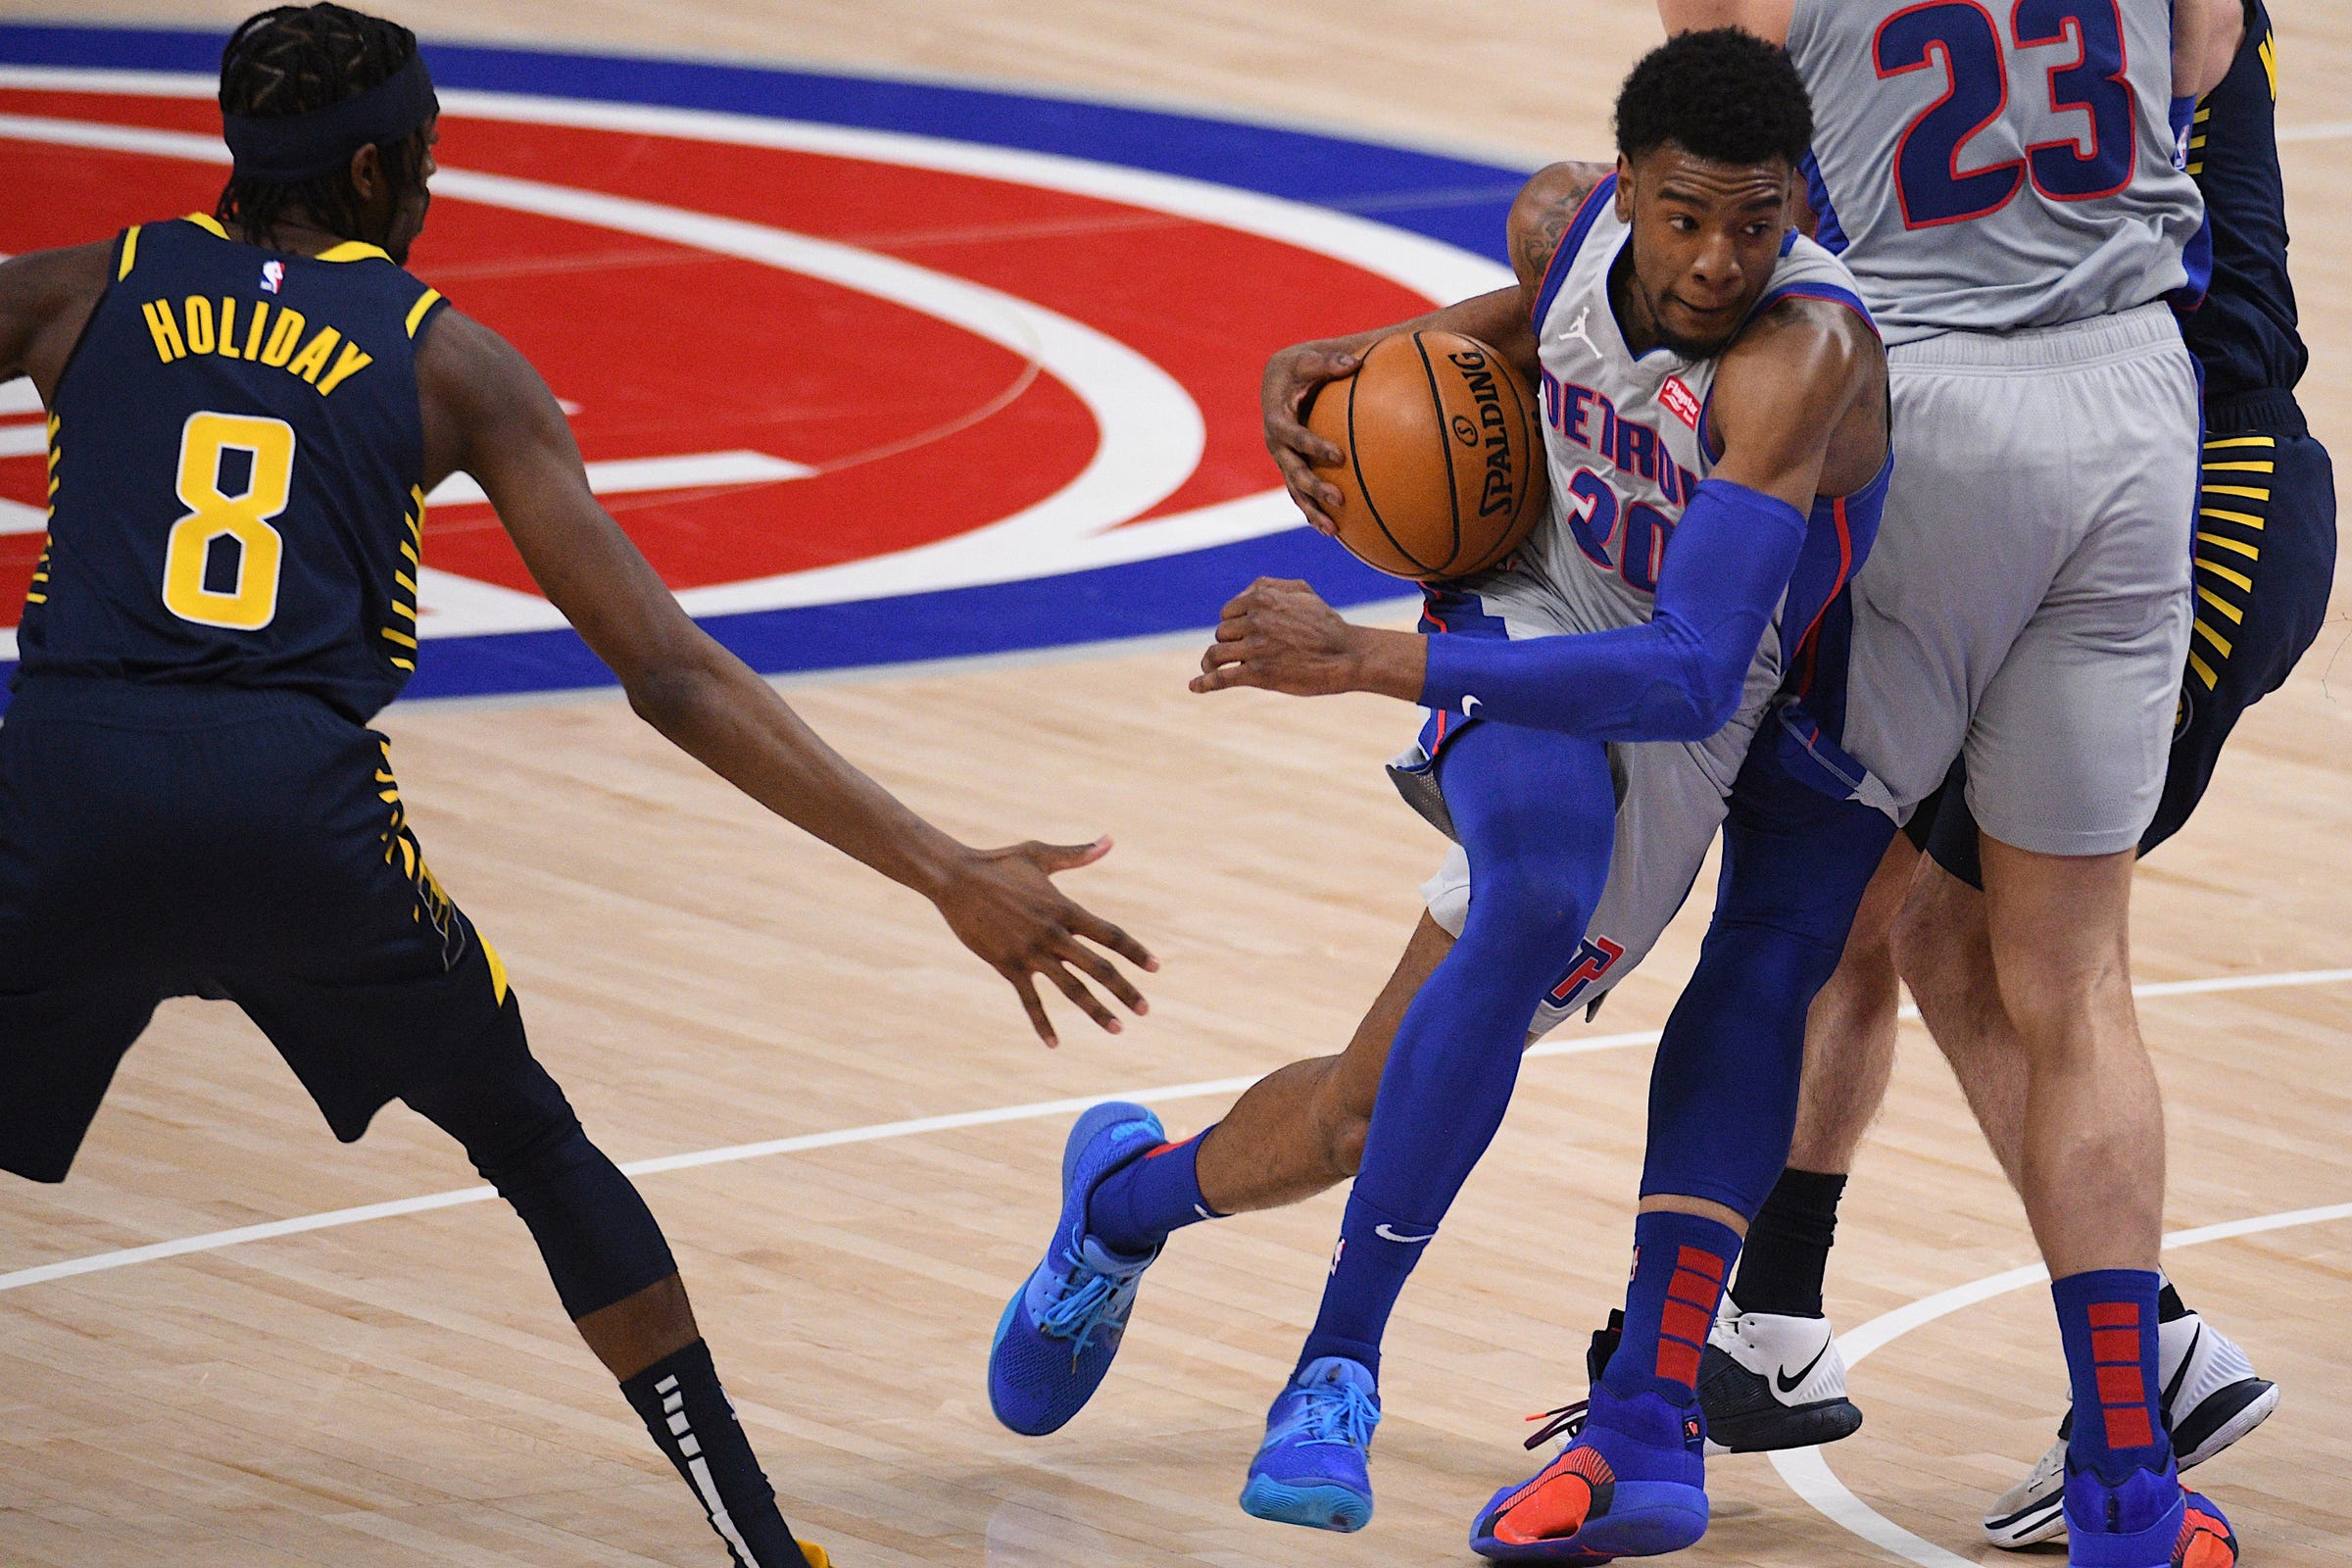 Detroit Pistons' cold night shooting leads to 111-95 loss to Pacers